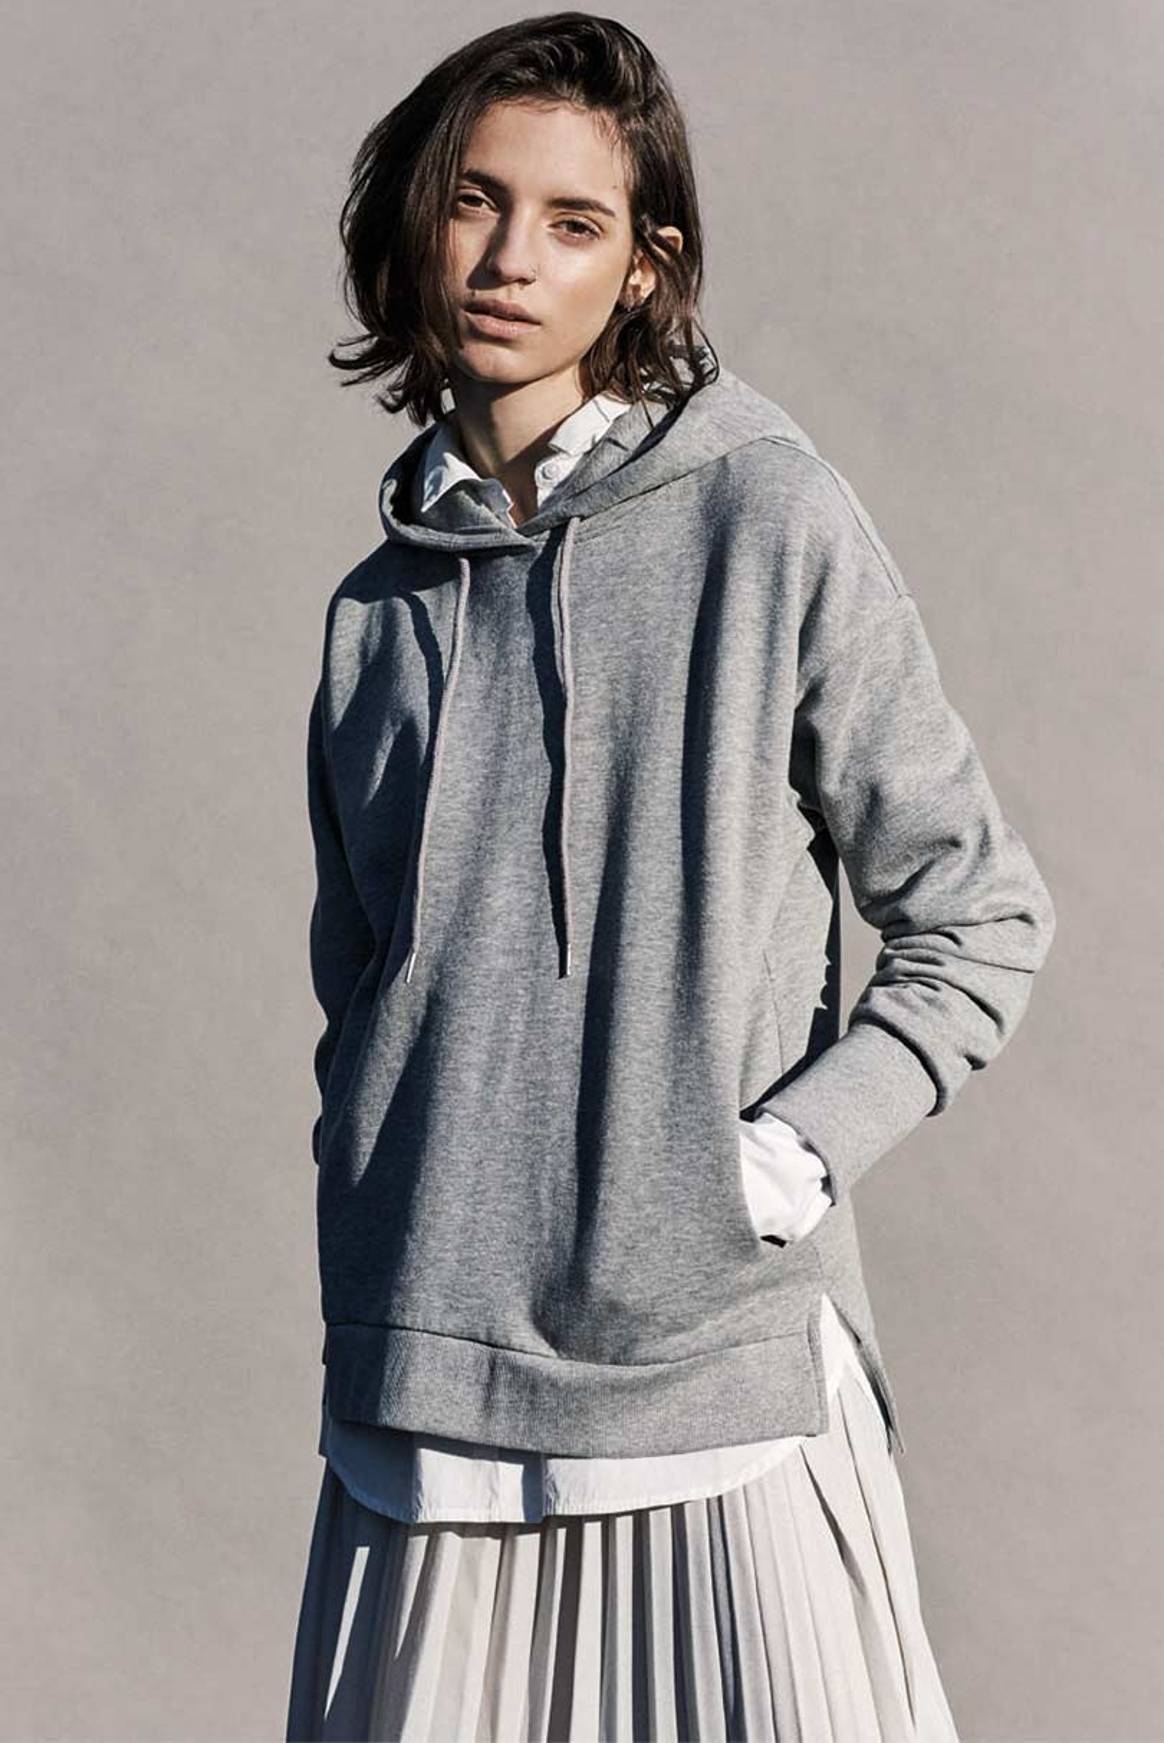 Vero Moda launches first loungewear collection